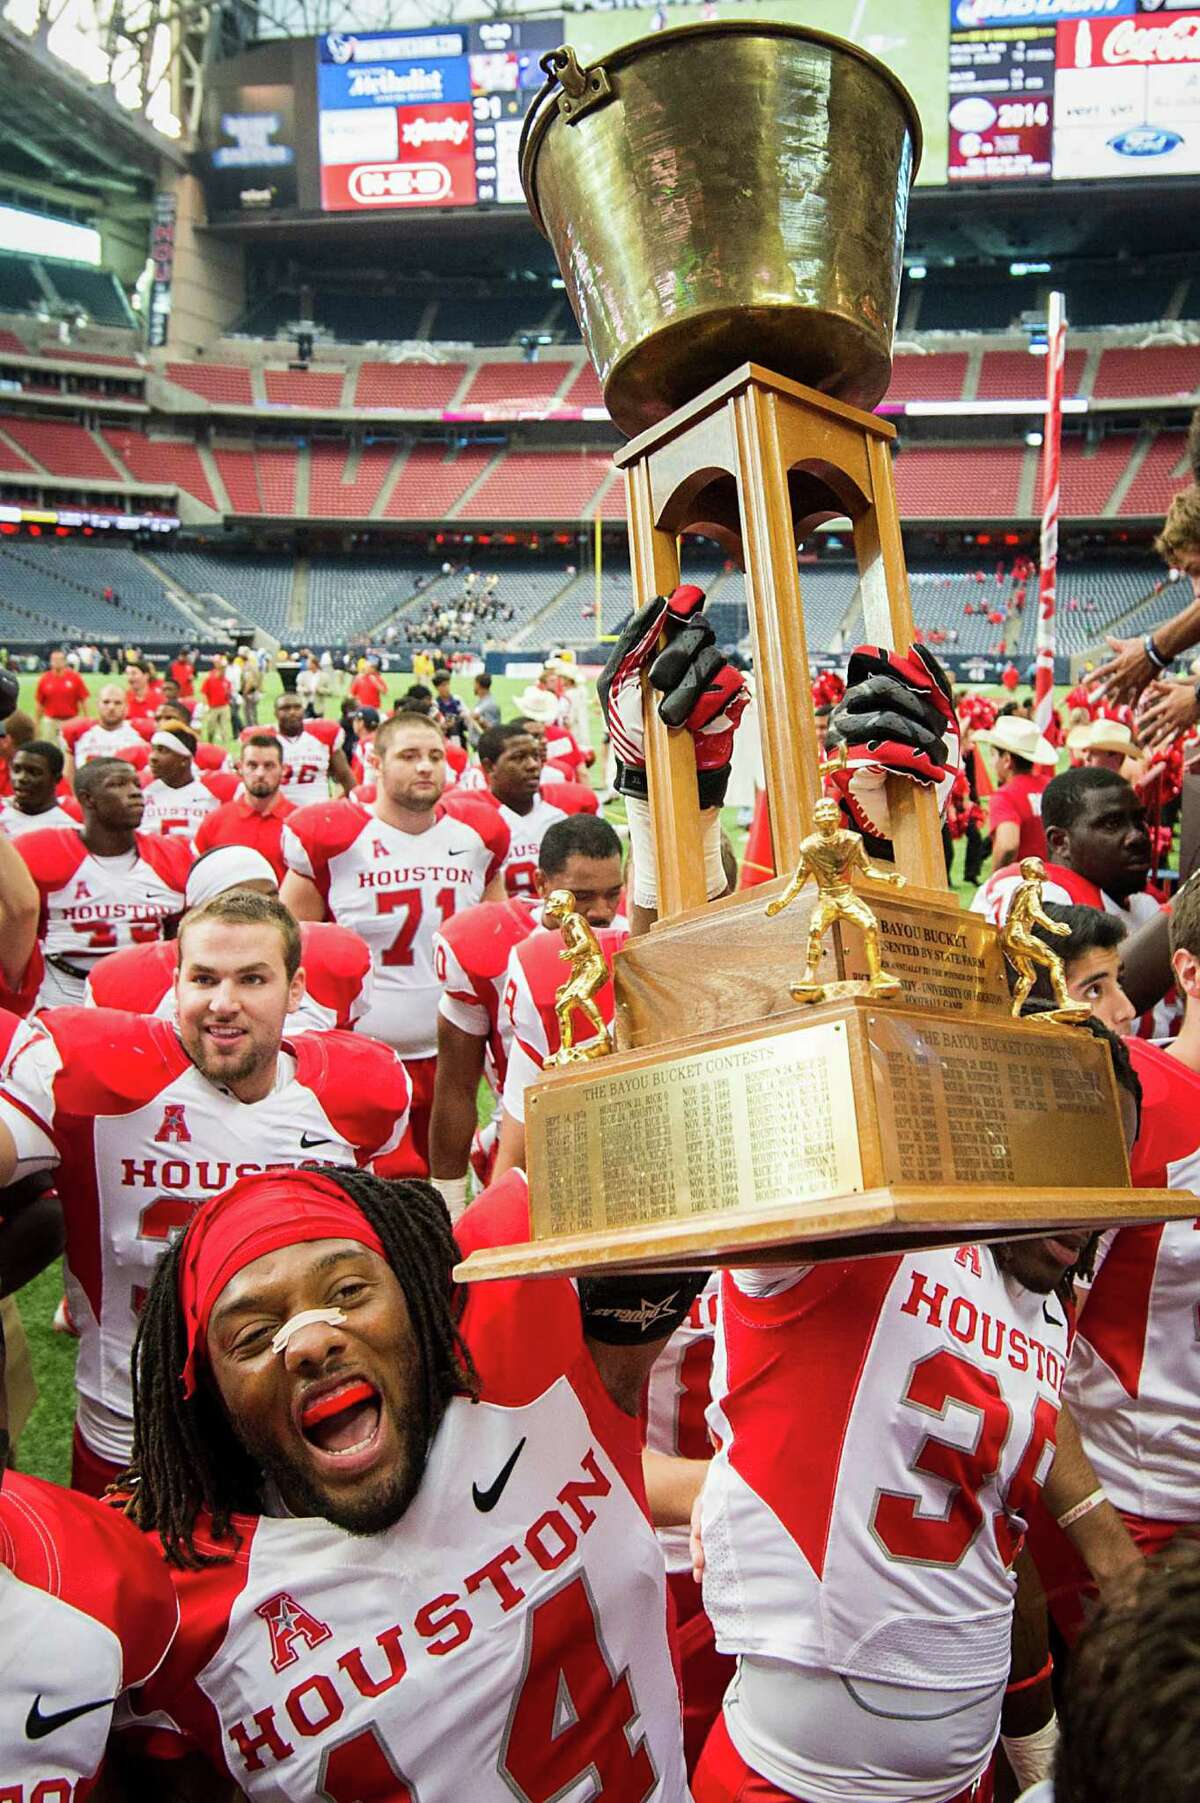 Houston defensive backs Jarrett Irving (14) and Steven Aikens (39) carry the Bayou Bucket off the Reliant Stadium field after beating Rice and claiming the trophy for the third consecutive year.